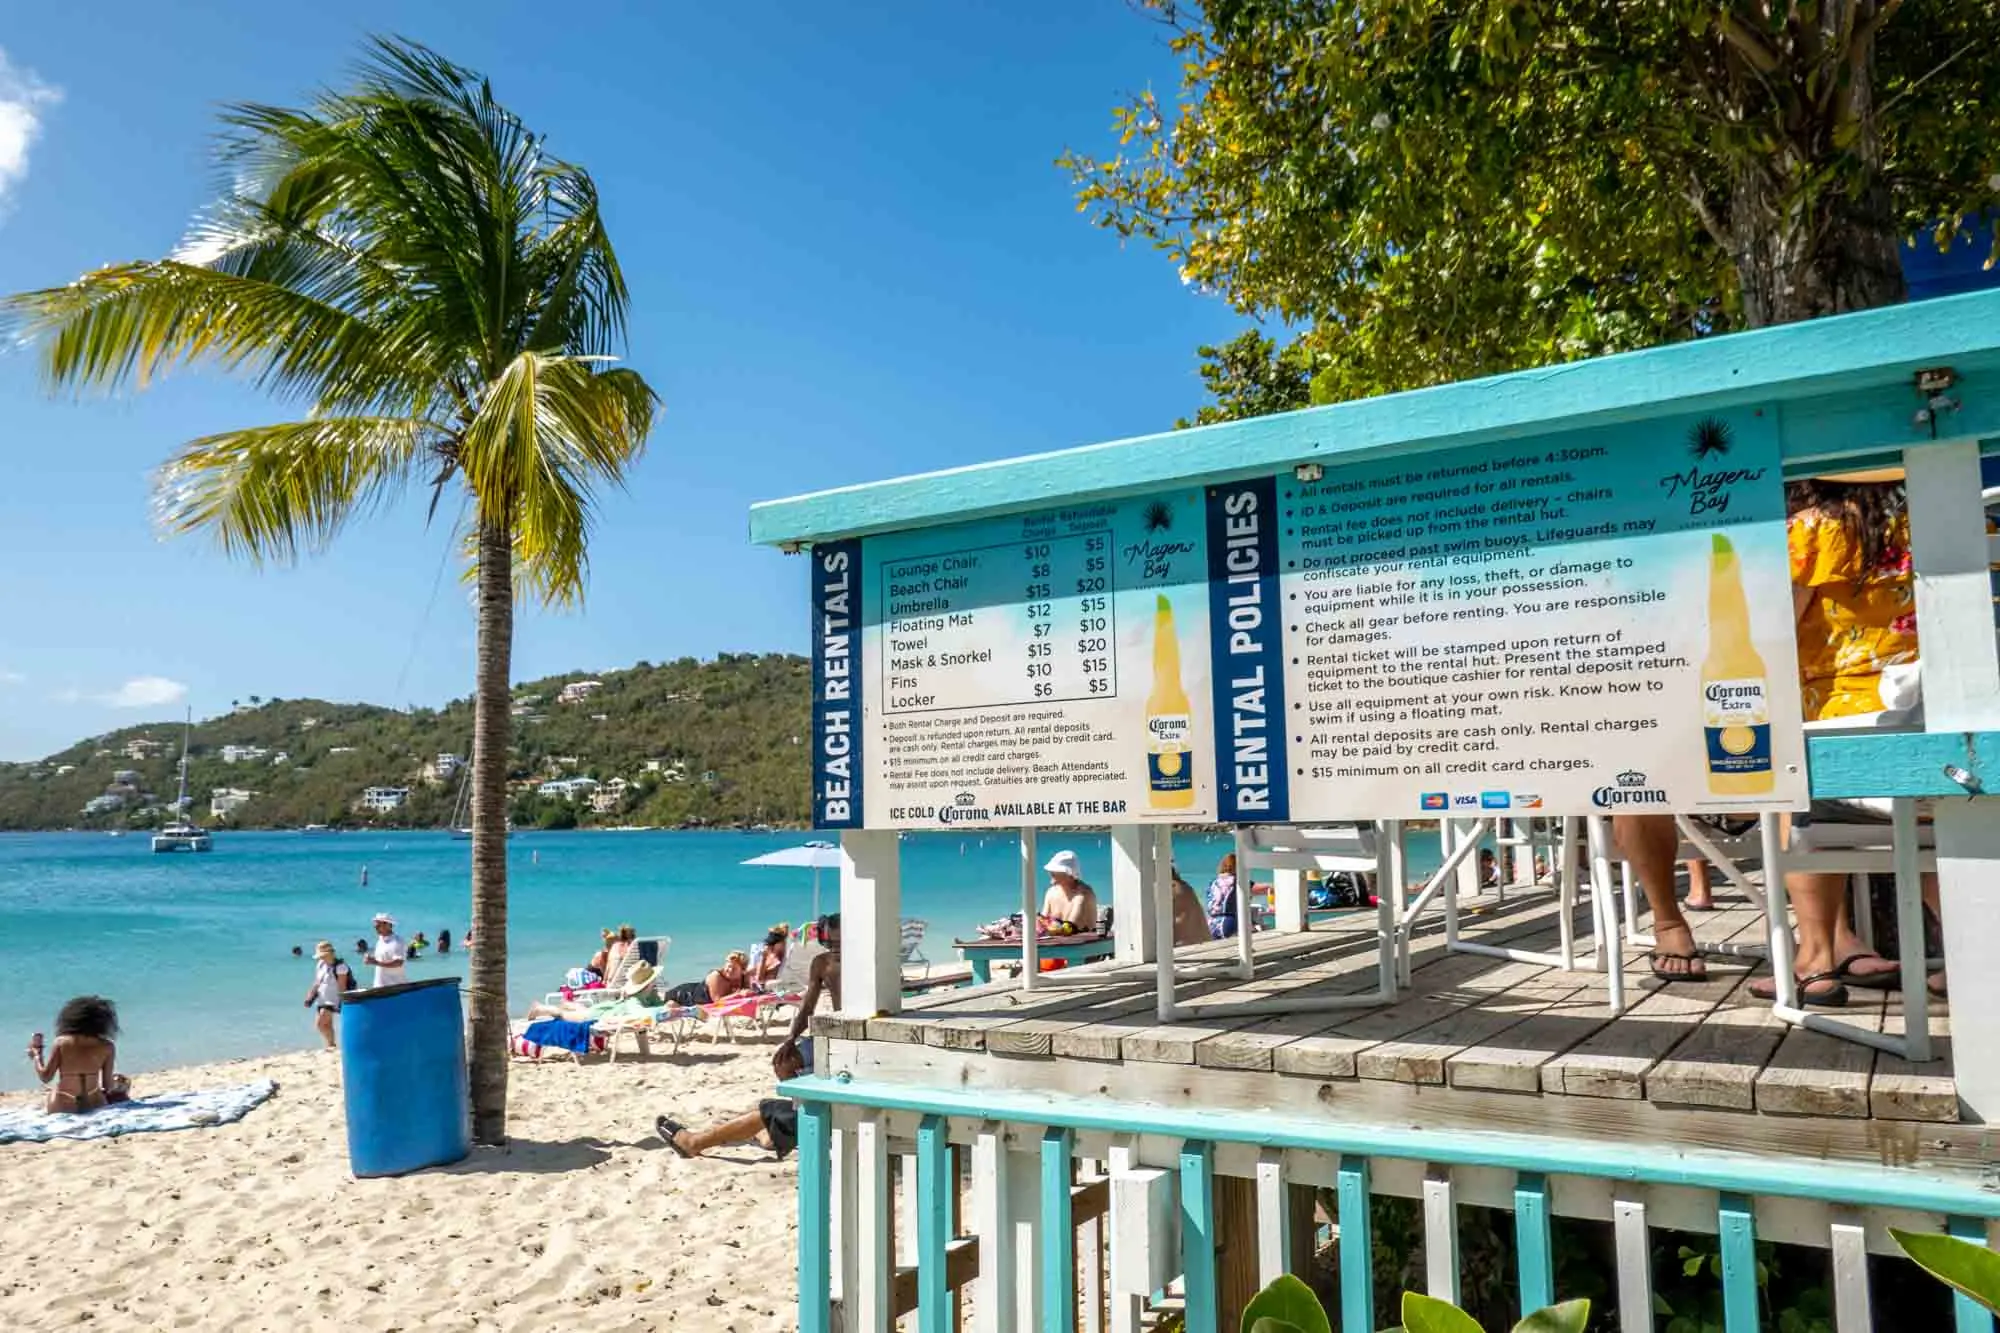 Rates for equipment rentals at Magens Bay Beach